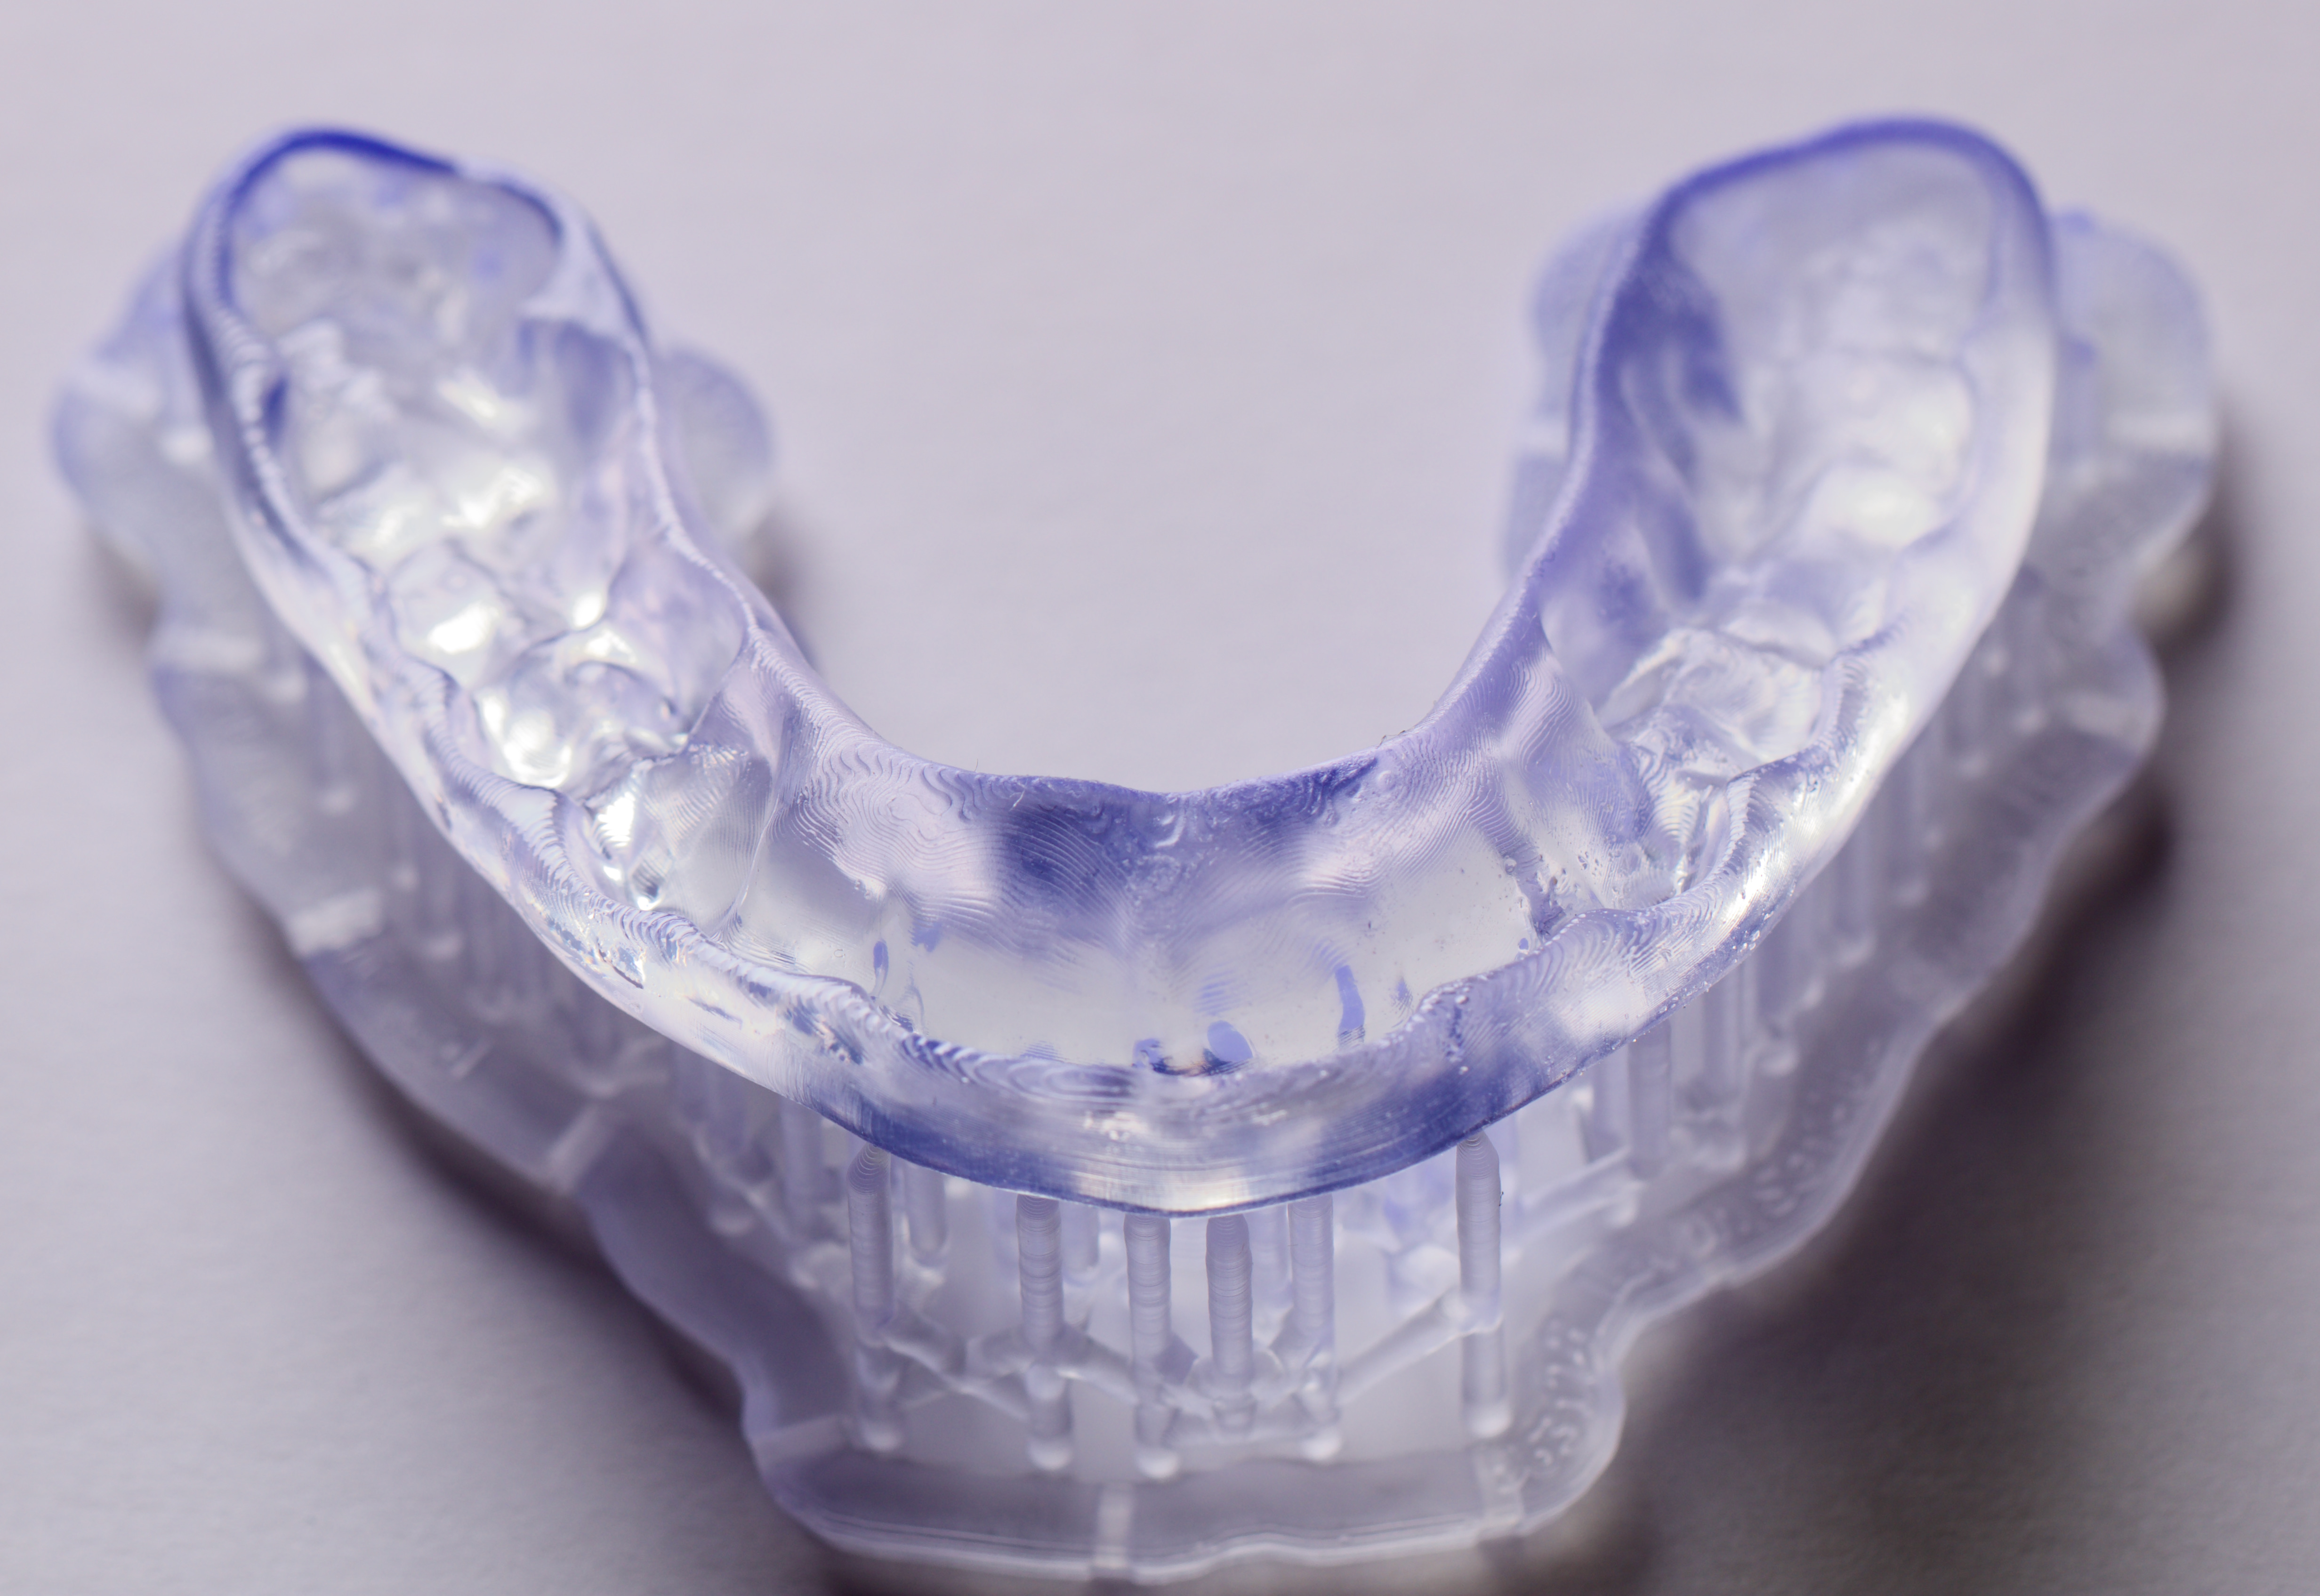 Fig. 8: Printed occlusal splint still on the supporting structures after polymerisation.